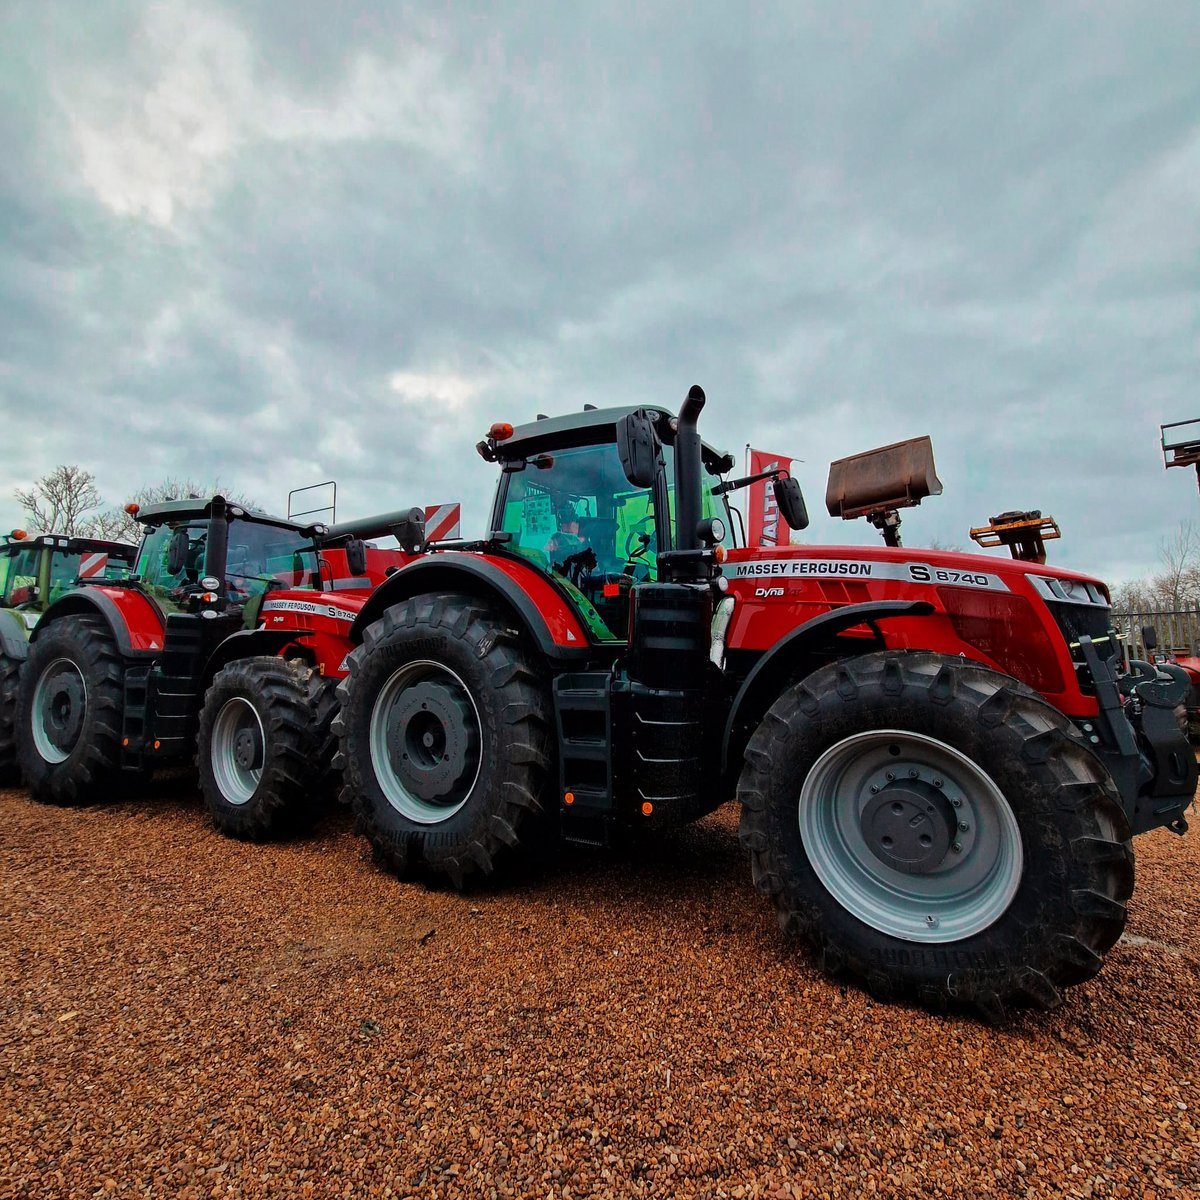 New Massey Ferguson 8740 – in stock! 🚜👌

Speak to your Area Sales Manager for more information or to book your demo.

#MasseyFerguson #MFBornToFarm #BornToFarm #MF #MF8740 #Tractor